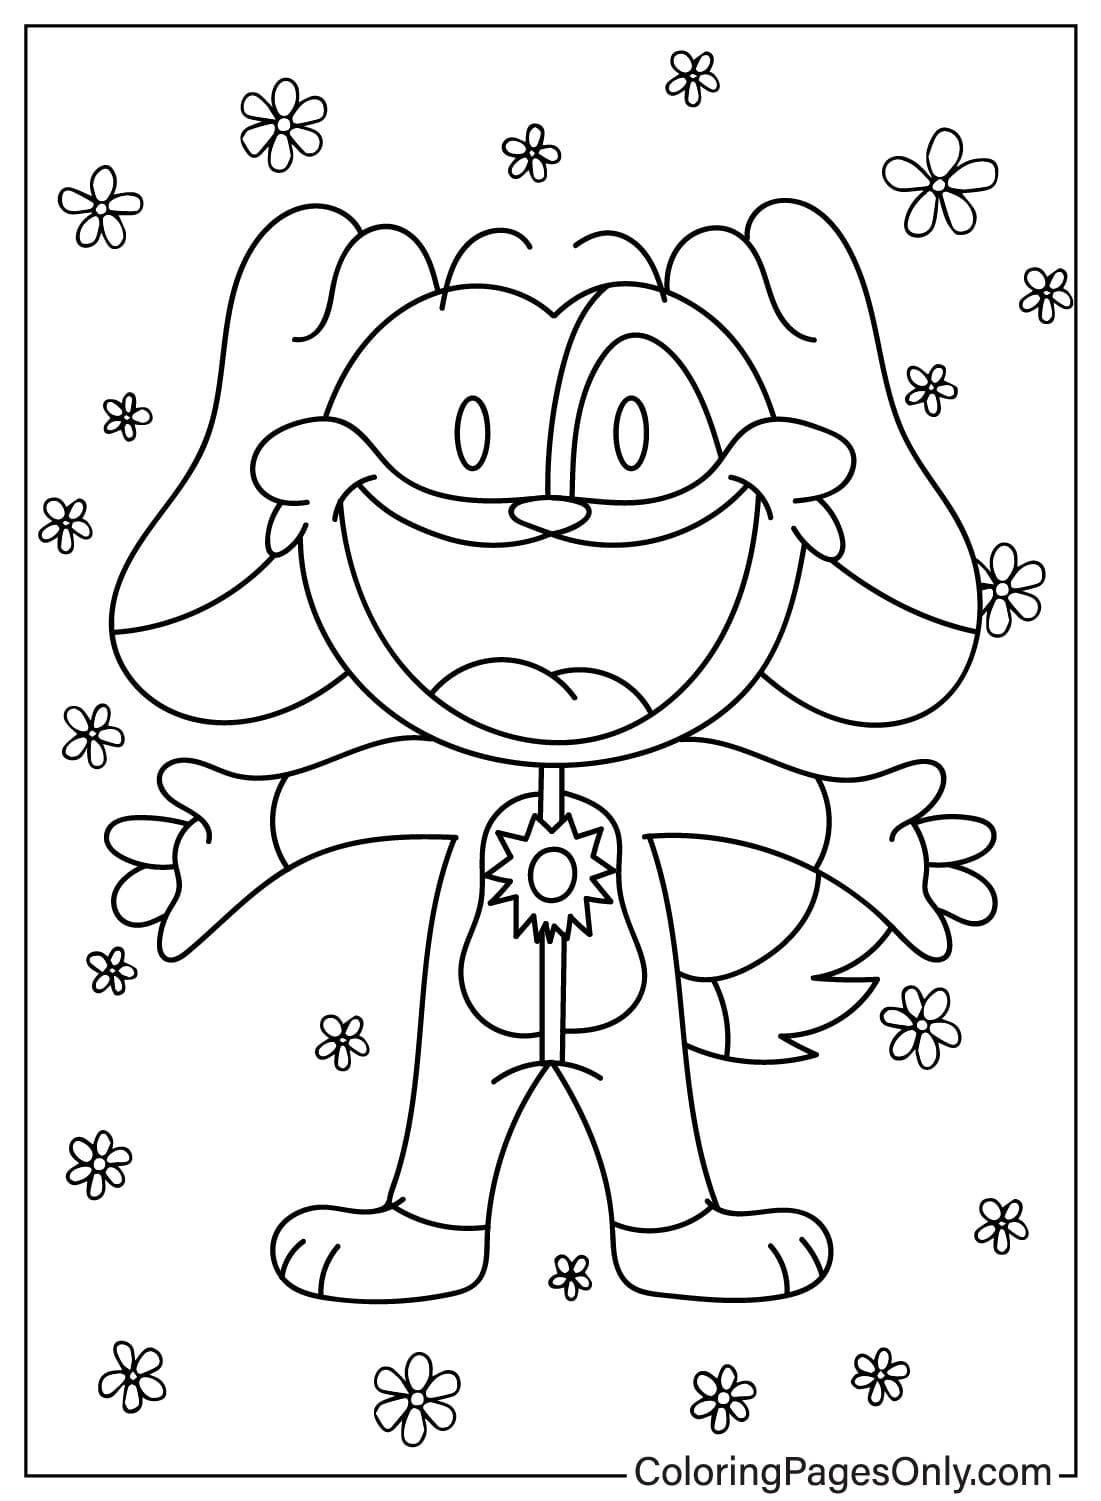 Cute DogDay Coloring Page from DogDay